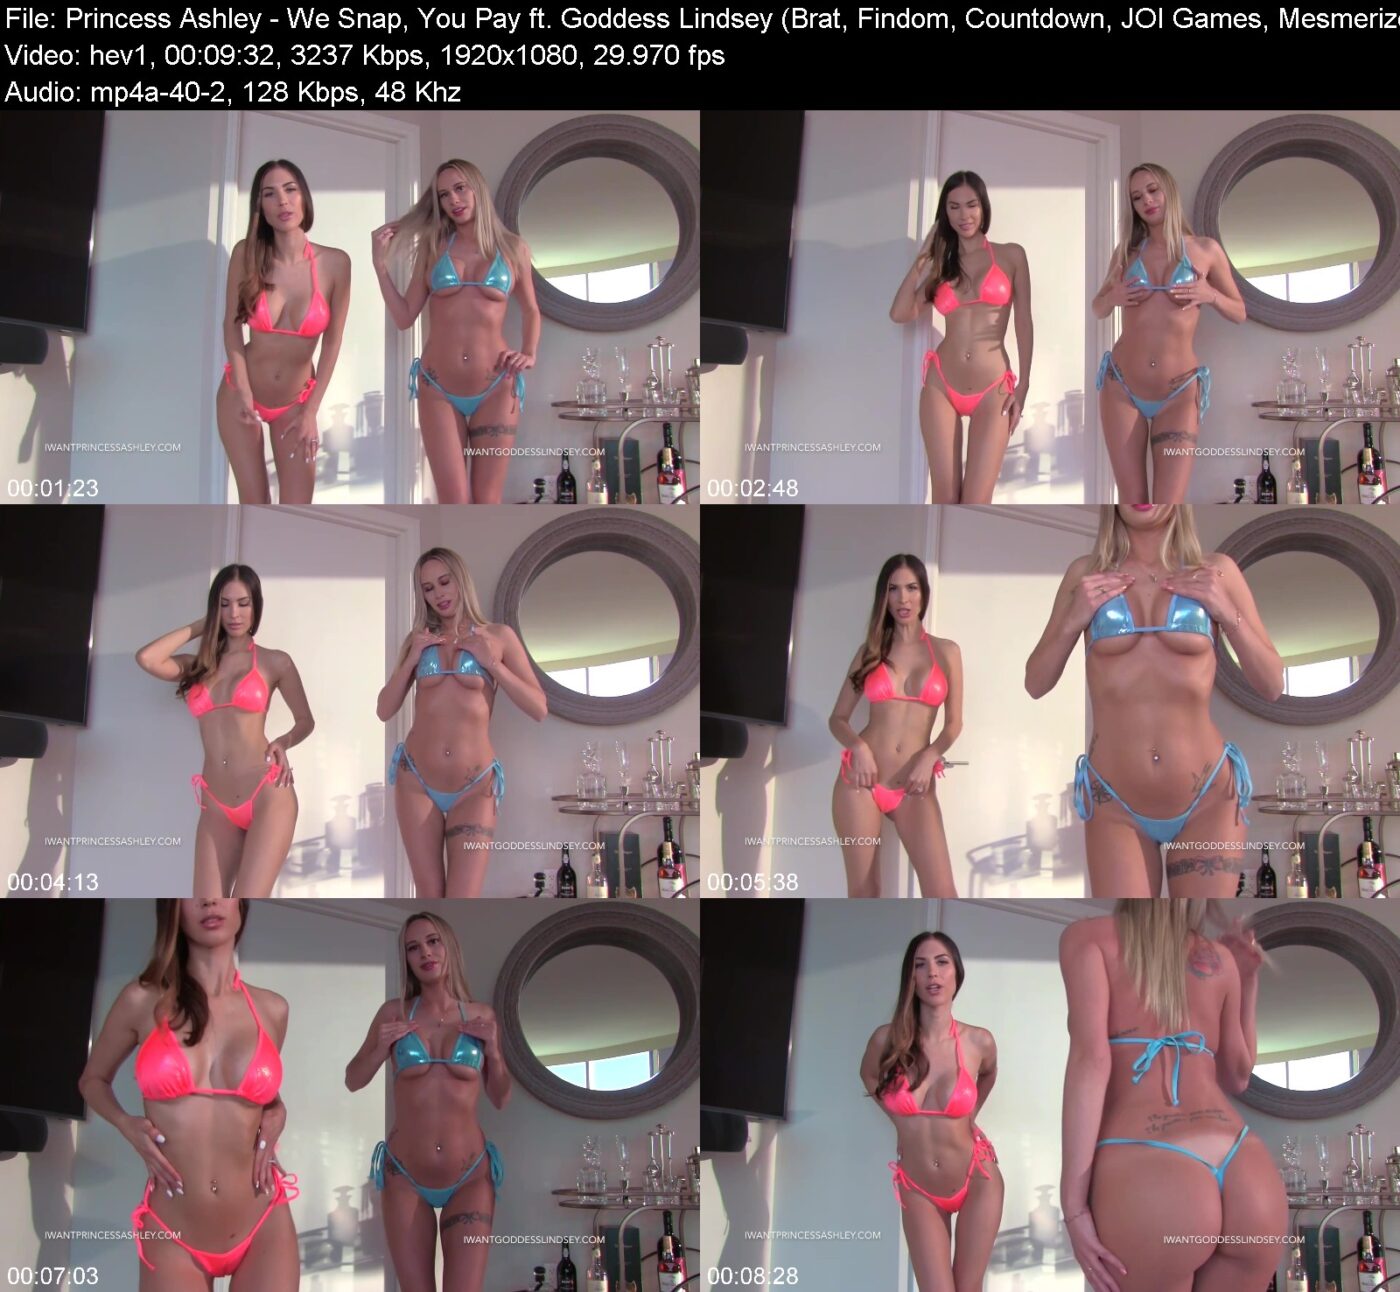 Princess Ashley in We Snap, You Pay ft. Goddess Lindsey (Brat, Findom, Countdown, JOI Games, Mesmerize) ($19) (2027808)